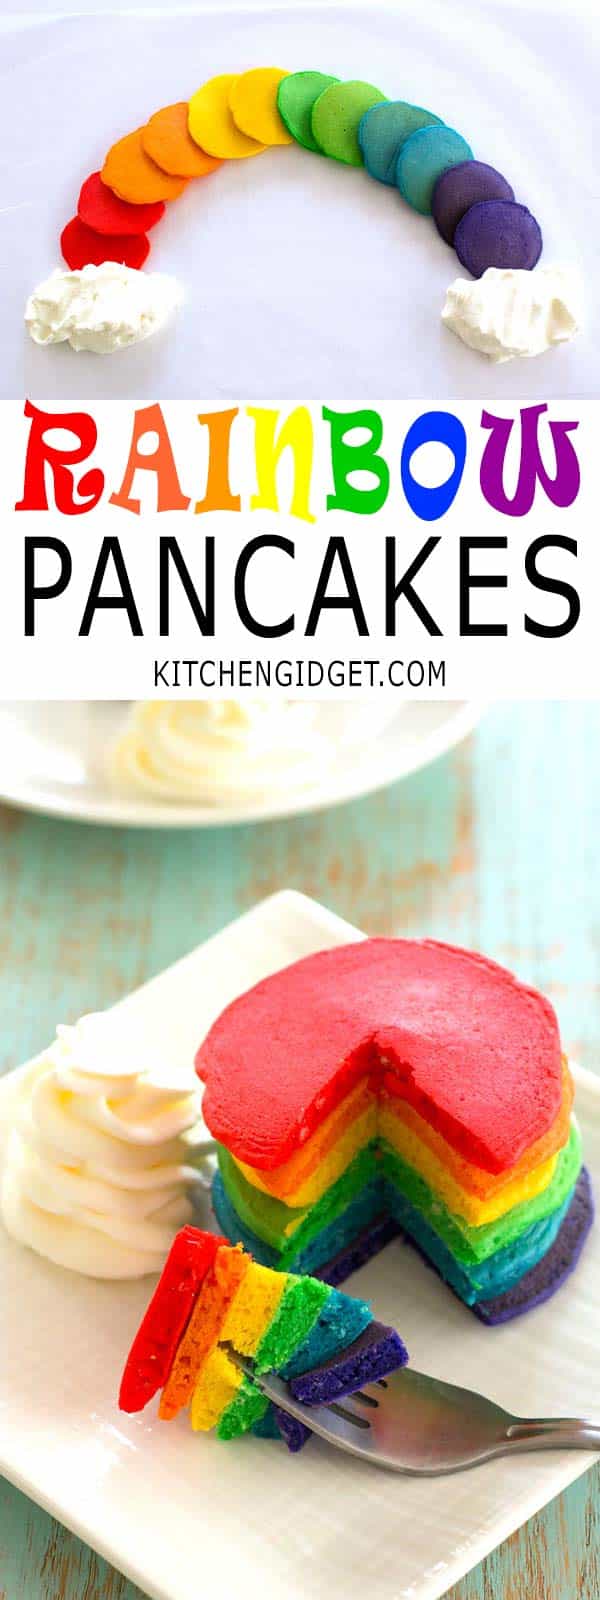 How to make rainbow pancakes for St. Patrick's Day breakfast! Colored pancakes with fluffy "clouds" of whipped cream are lucky indeed!